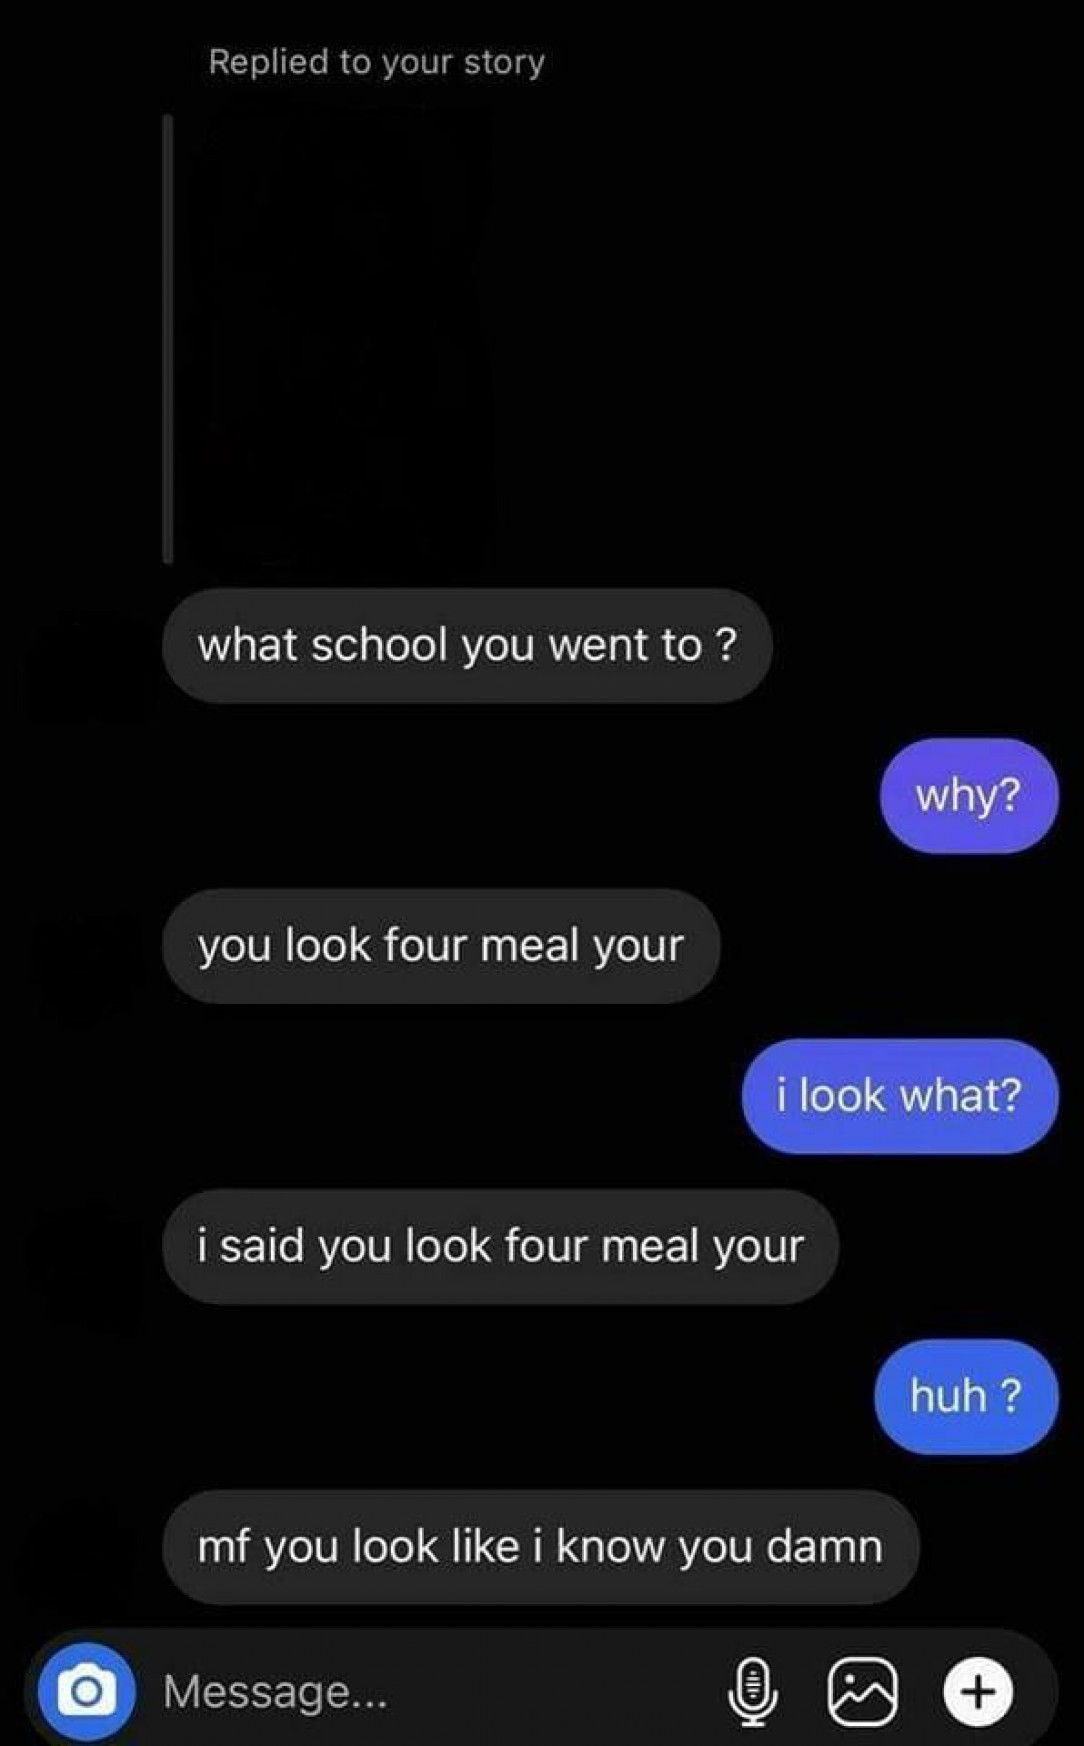 Girl looks four meal your